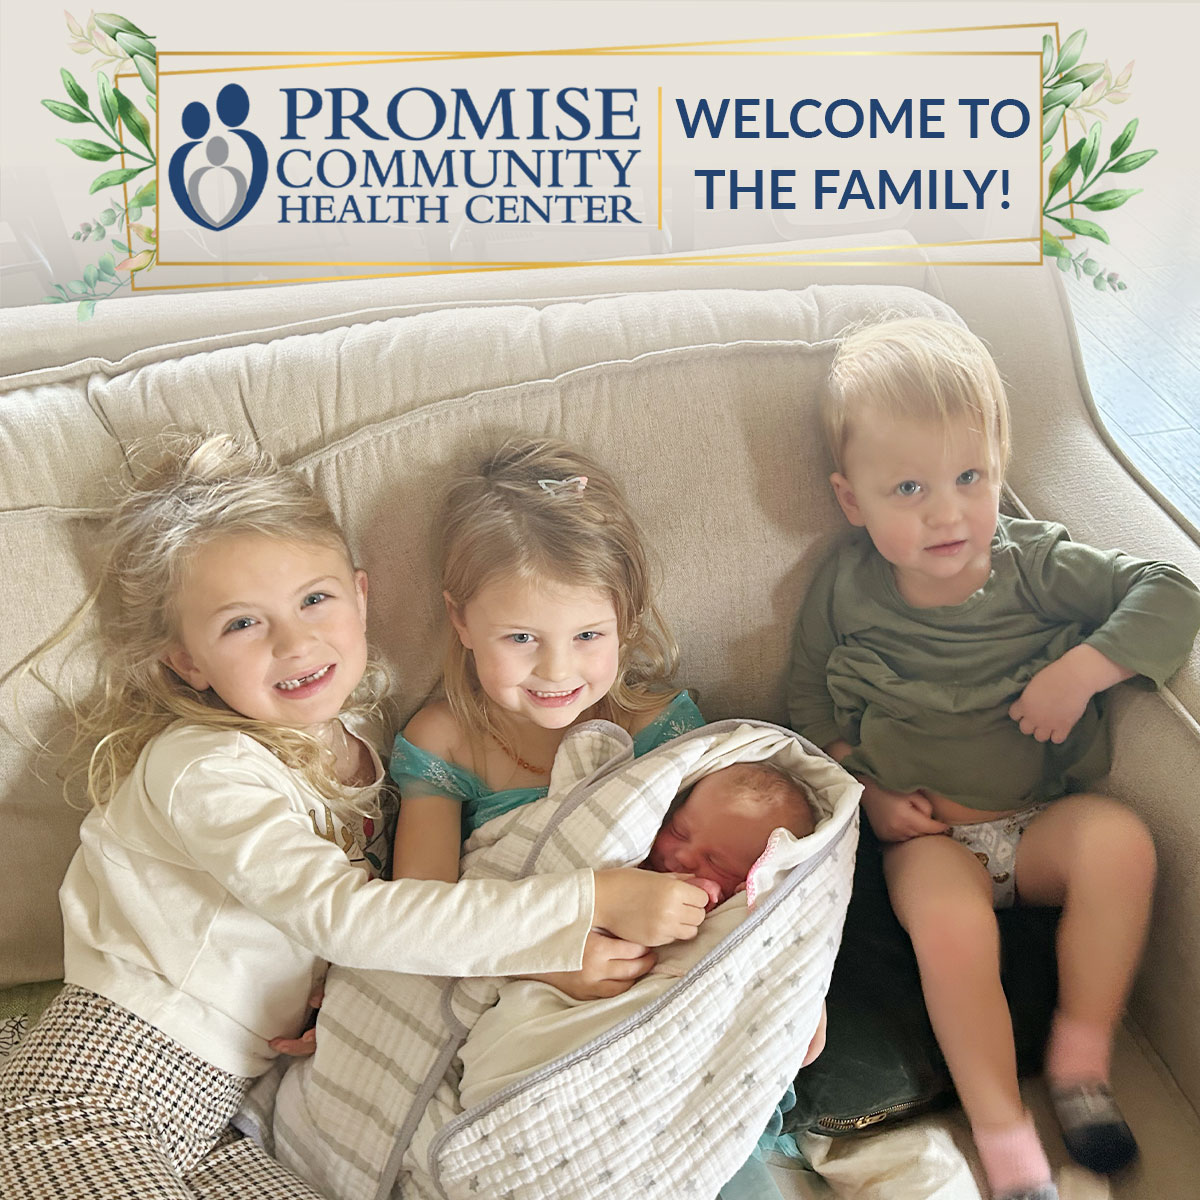 Home birth in Le Mars, Iowa | Promise Community Health Center in Sioux Center, Iowa | Midwives in northwest Iowa, Midwives in southeast South Dakota, Midwives in southwest Minnesota | Midwives in Sioux Falls South Dakota, Midwives in Beresford South Dakota, Midwives in Sioux City IA, Midwives in LeMars IA, Midwives in Worthington MN, Midwives in Iowa, Midwives in South Dakota, Midwives in Minnesota